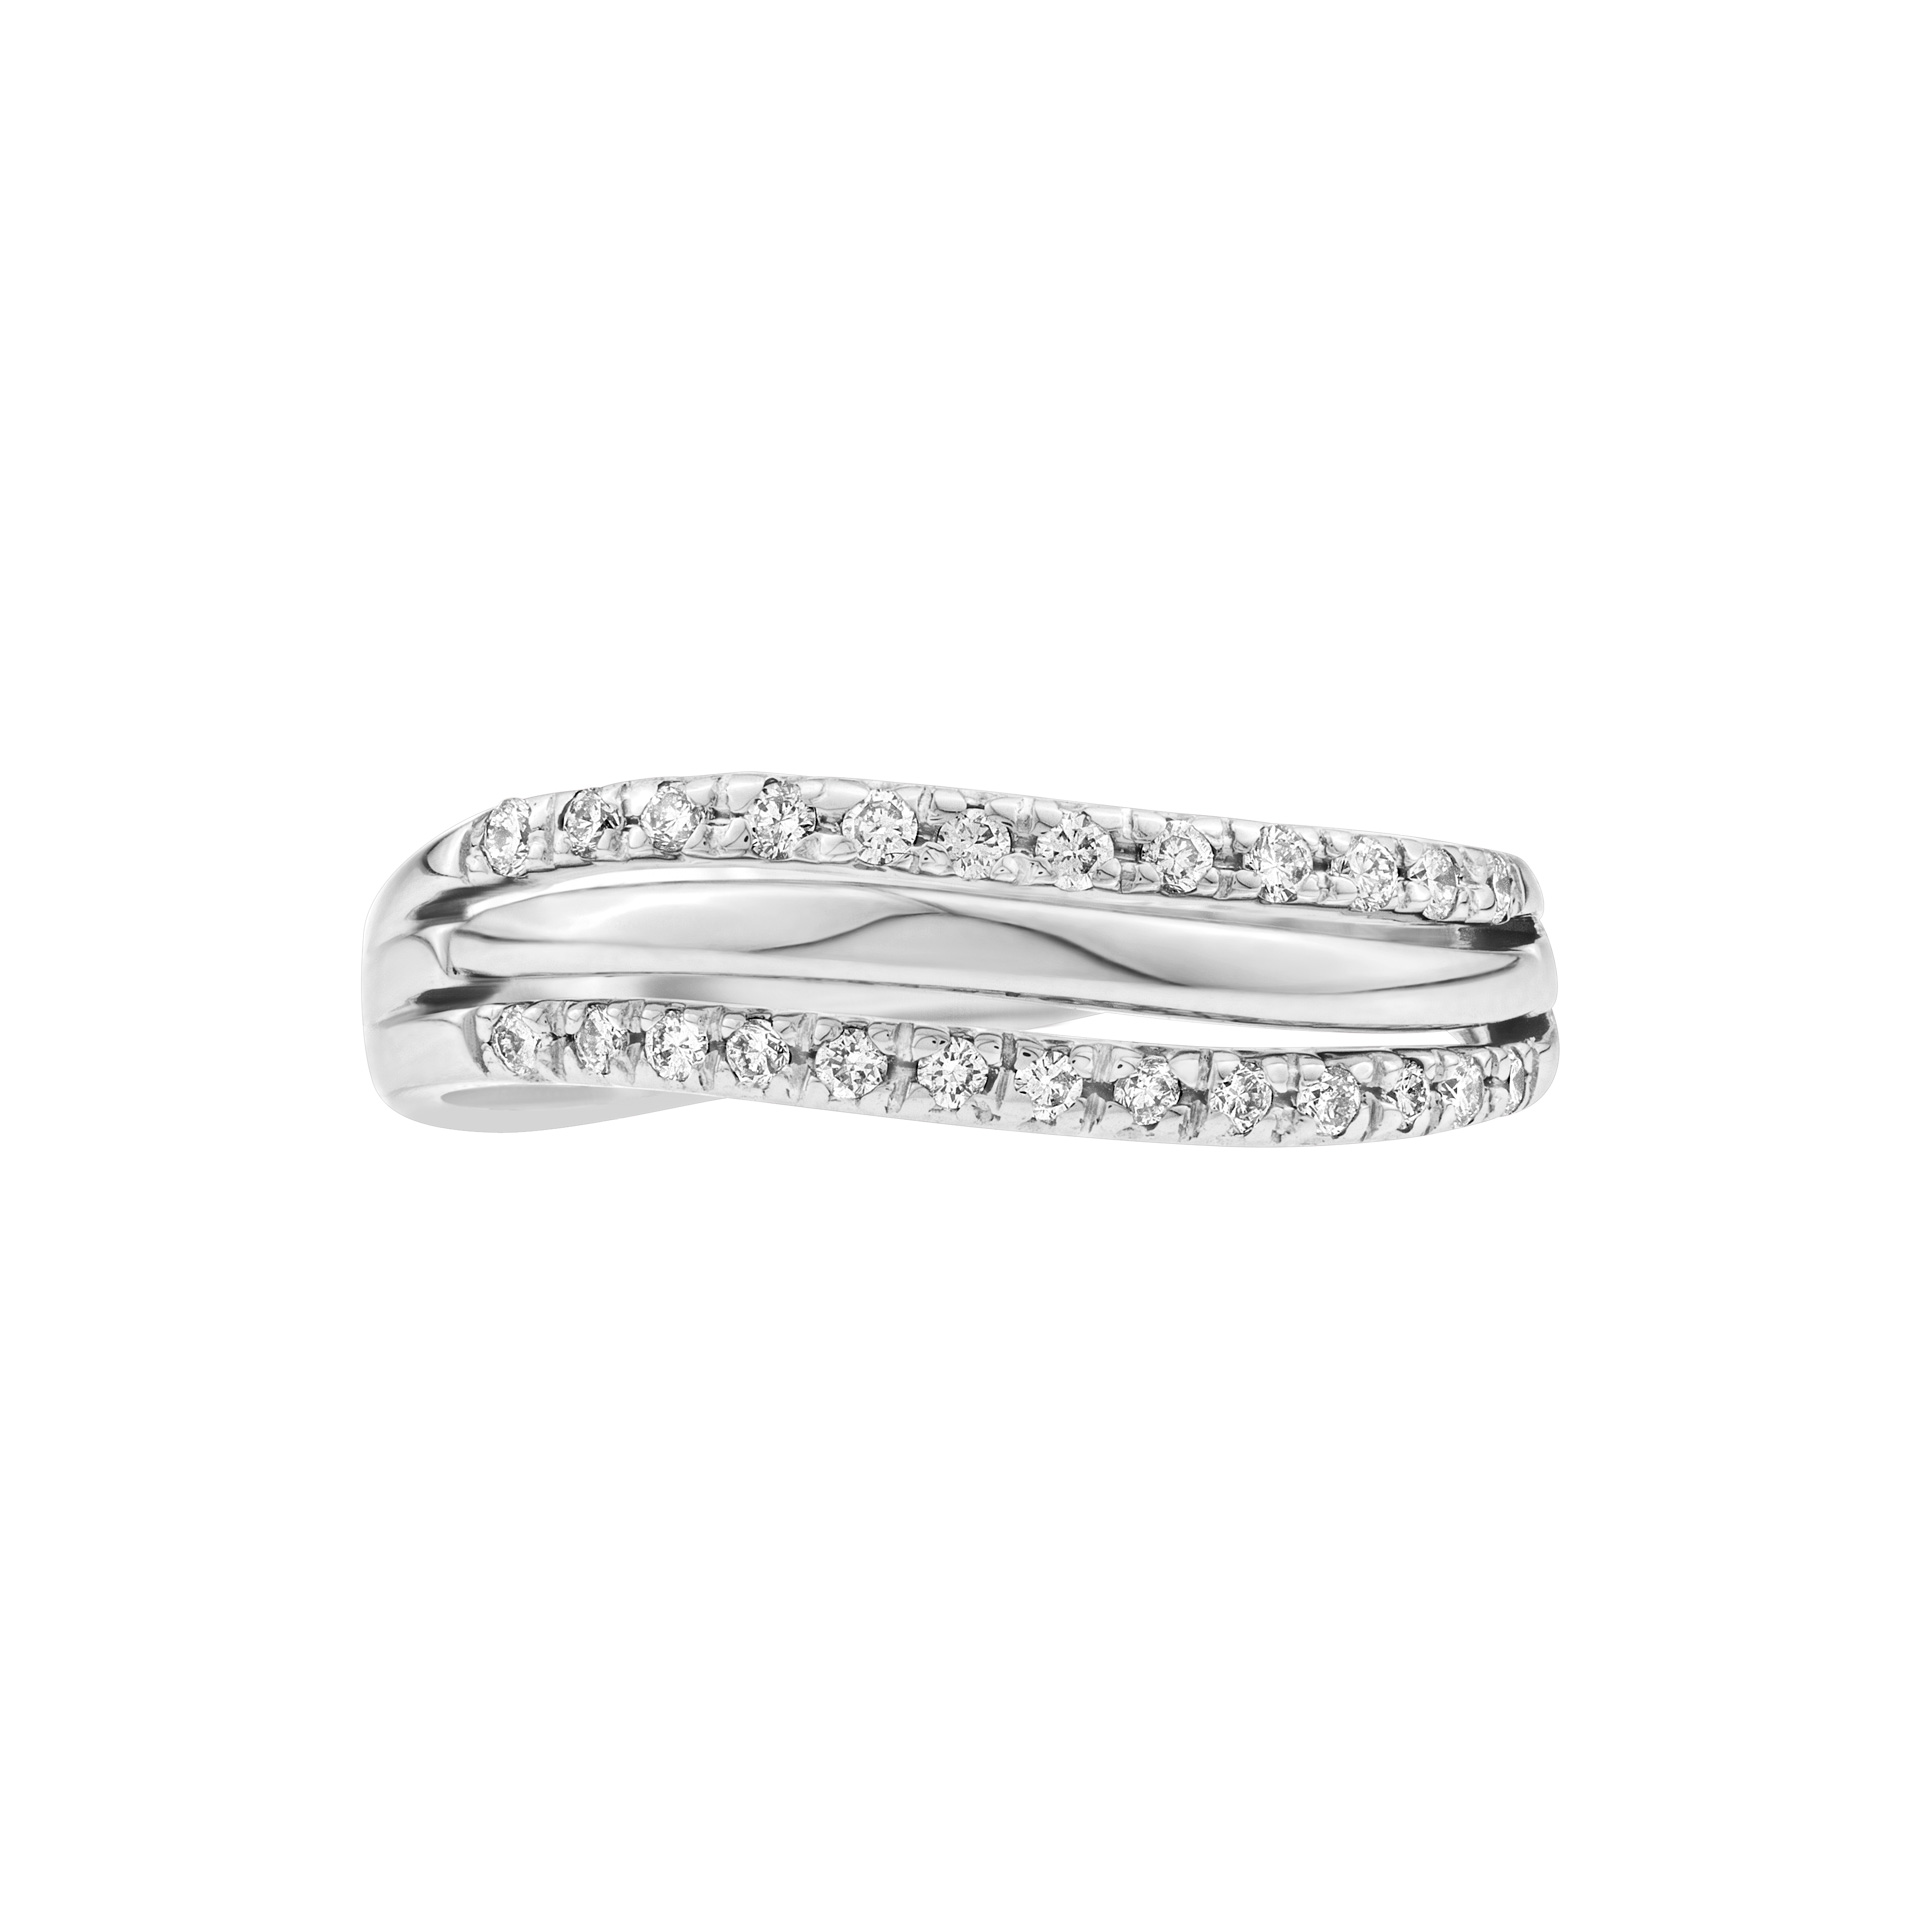 RIng with two rows of diamonds in 18K white gold